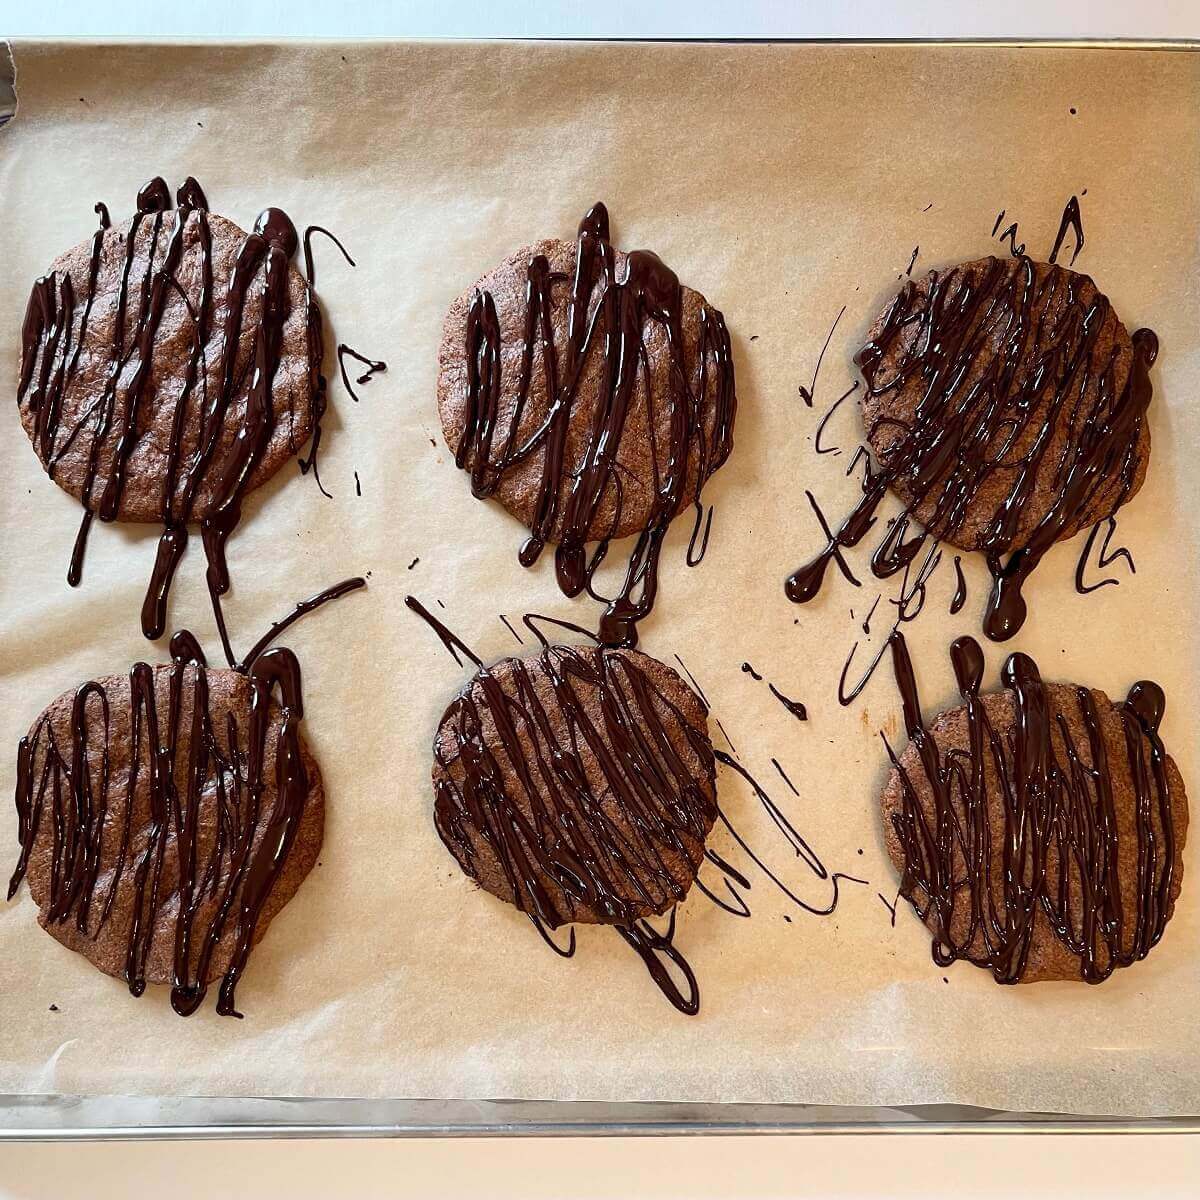 Chocolate drizzled flax cookies on a baking sheet.